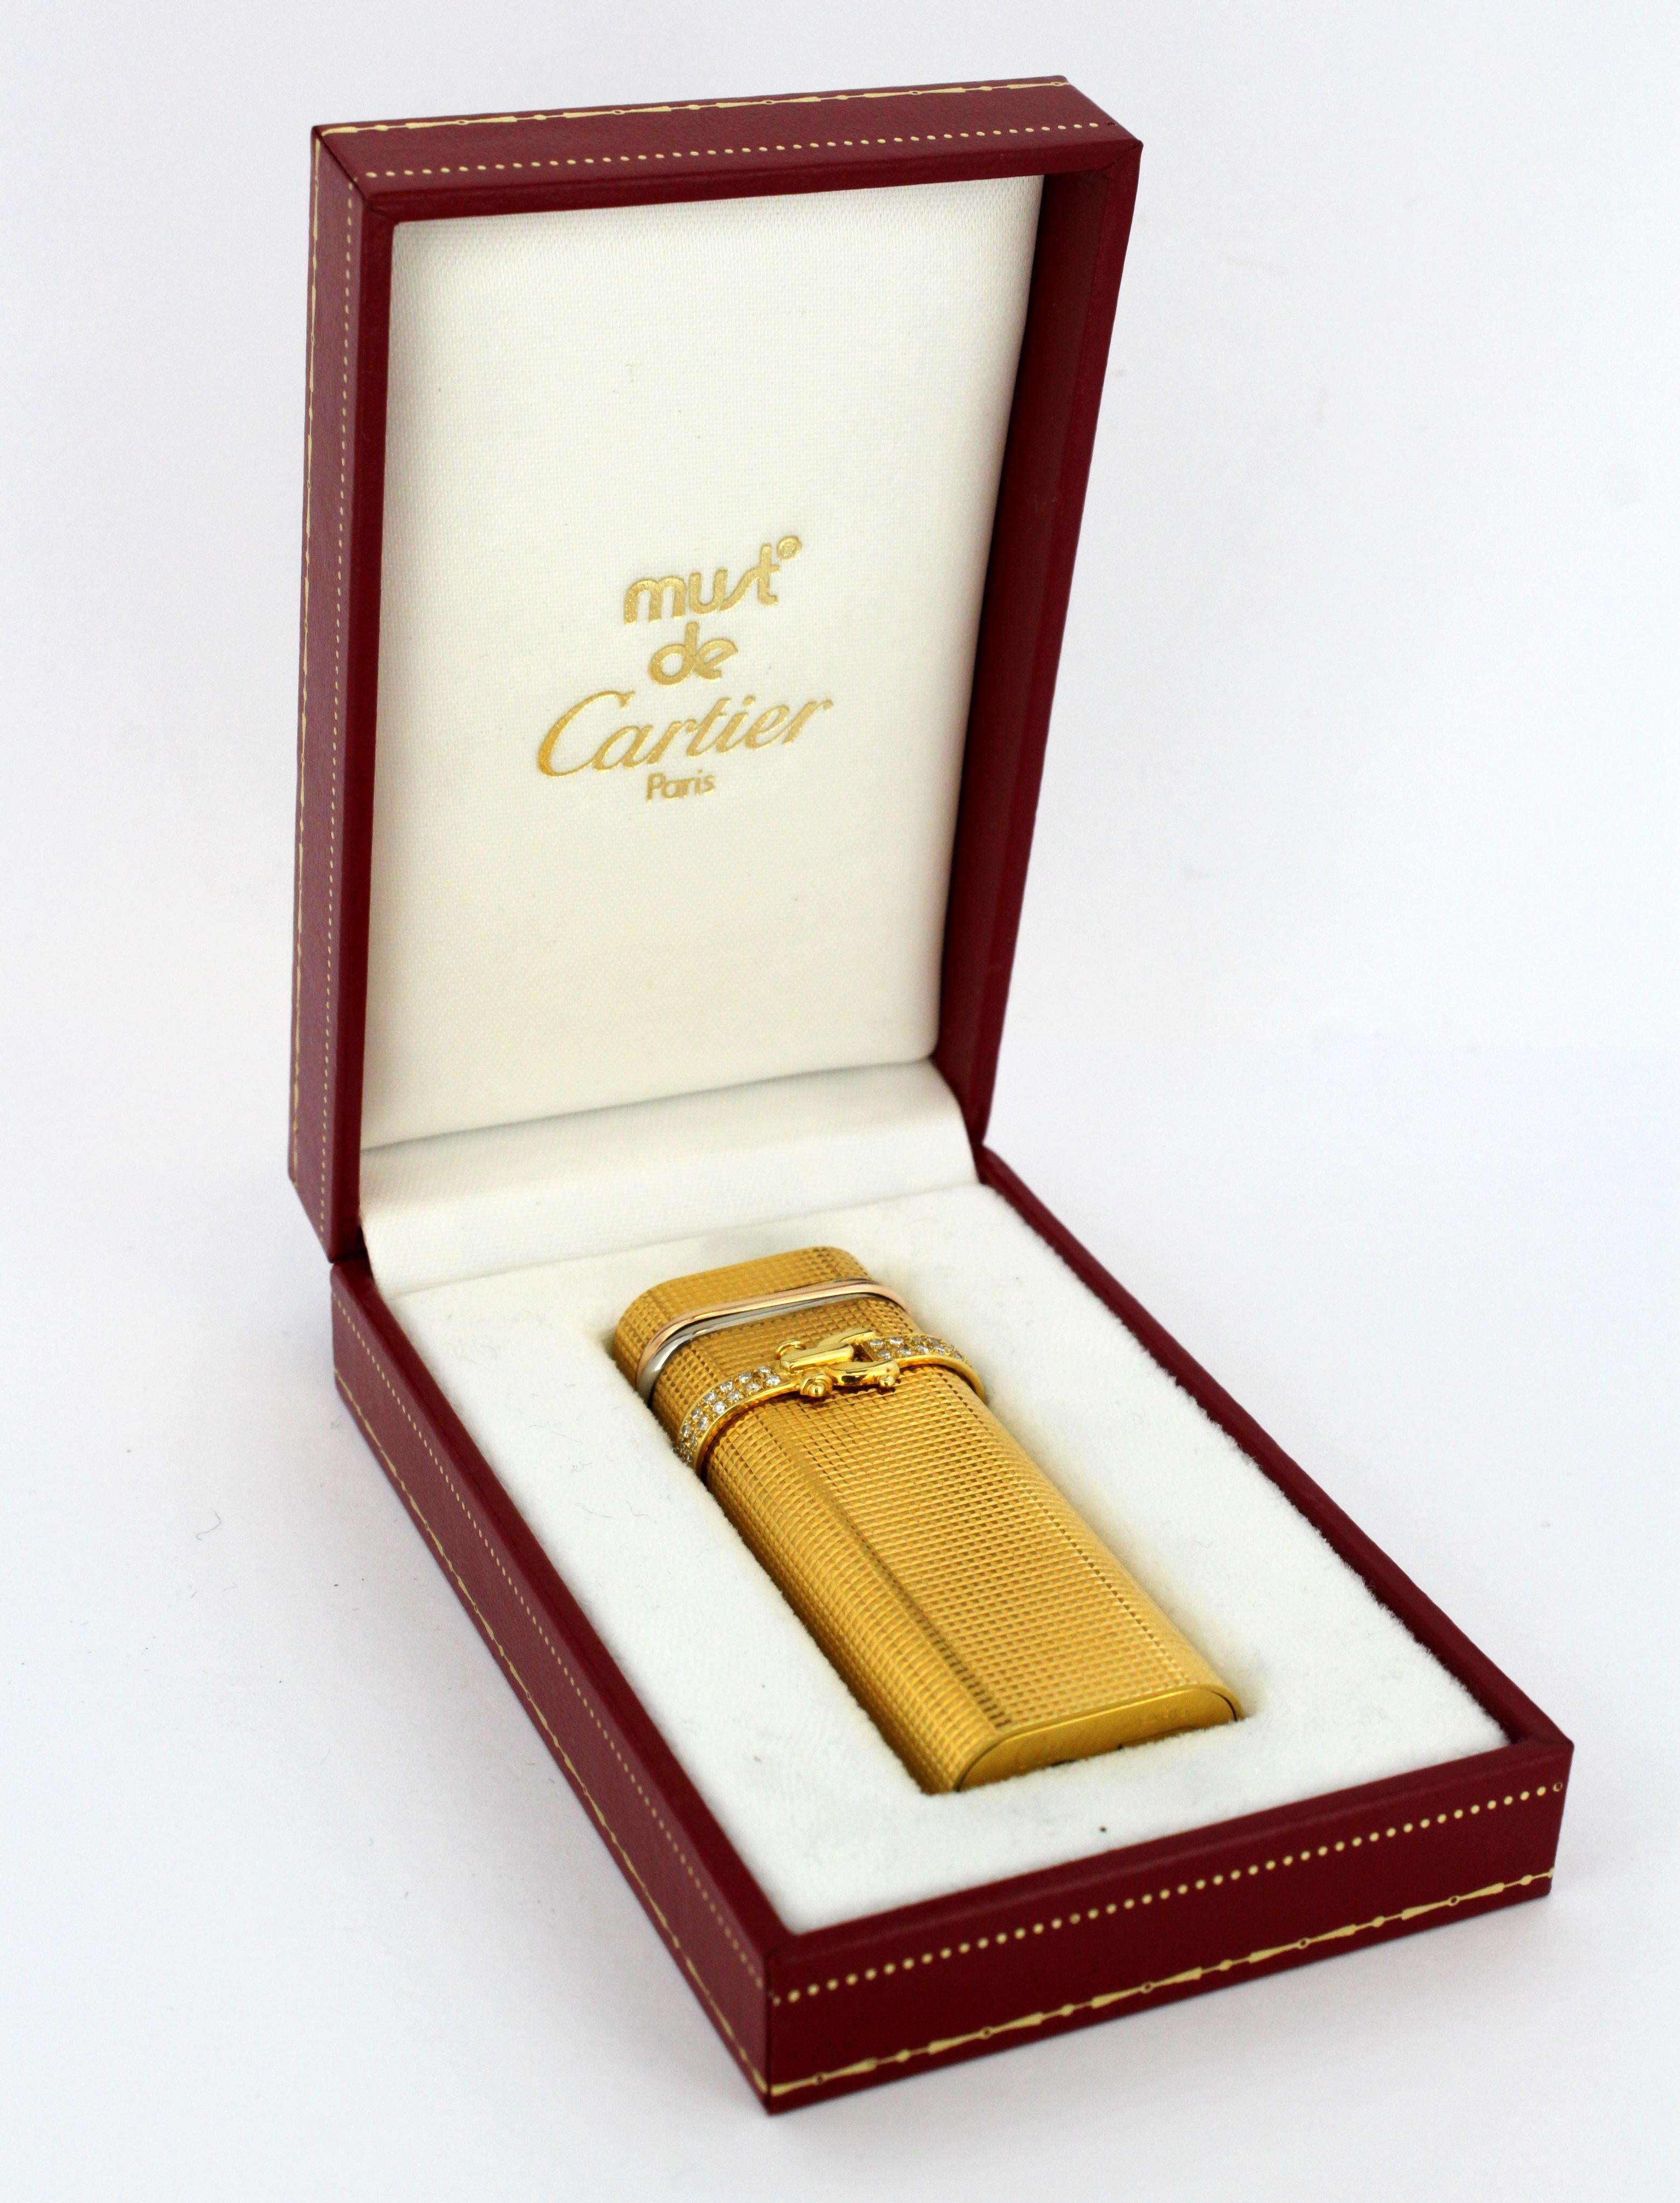 Vintage Cartier gold plated lighter with diamonds.
Made in France Circa 1990's
Serial : 46941N
Fully working.

Dimensions - 
Length x Width x Depth : 7 x 2.8 x 1.5 cm
Weight : 86 grams

Diamonds - 
Cut : Round
Number of diamonds : 60
Approx total